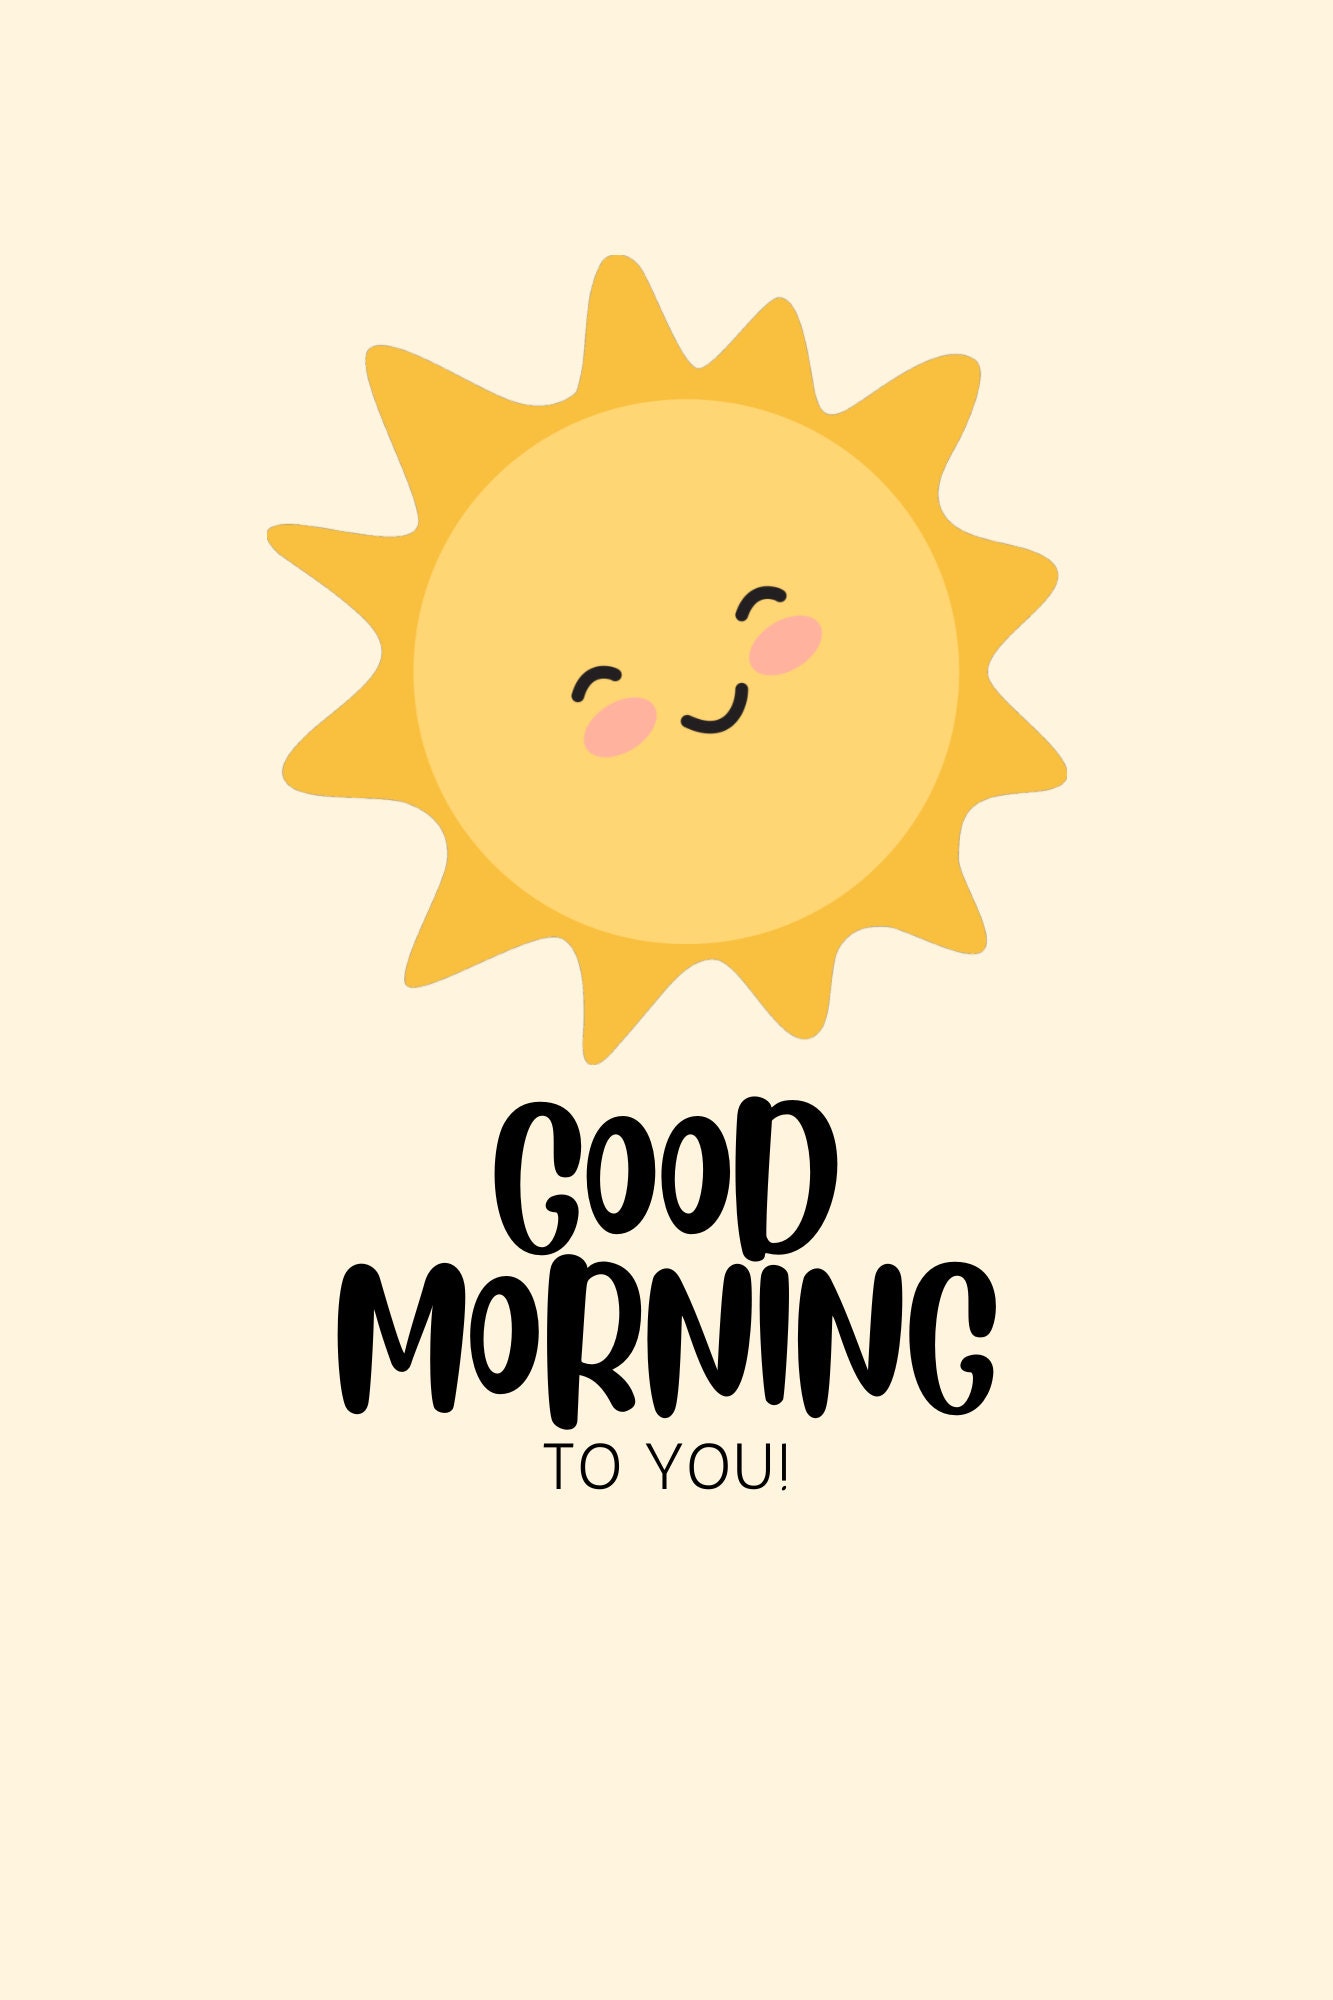 Good Morning to You - Etsy